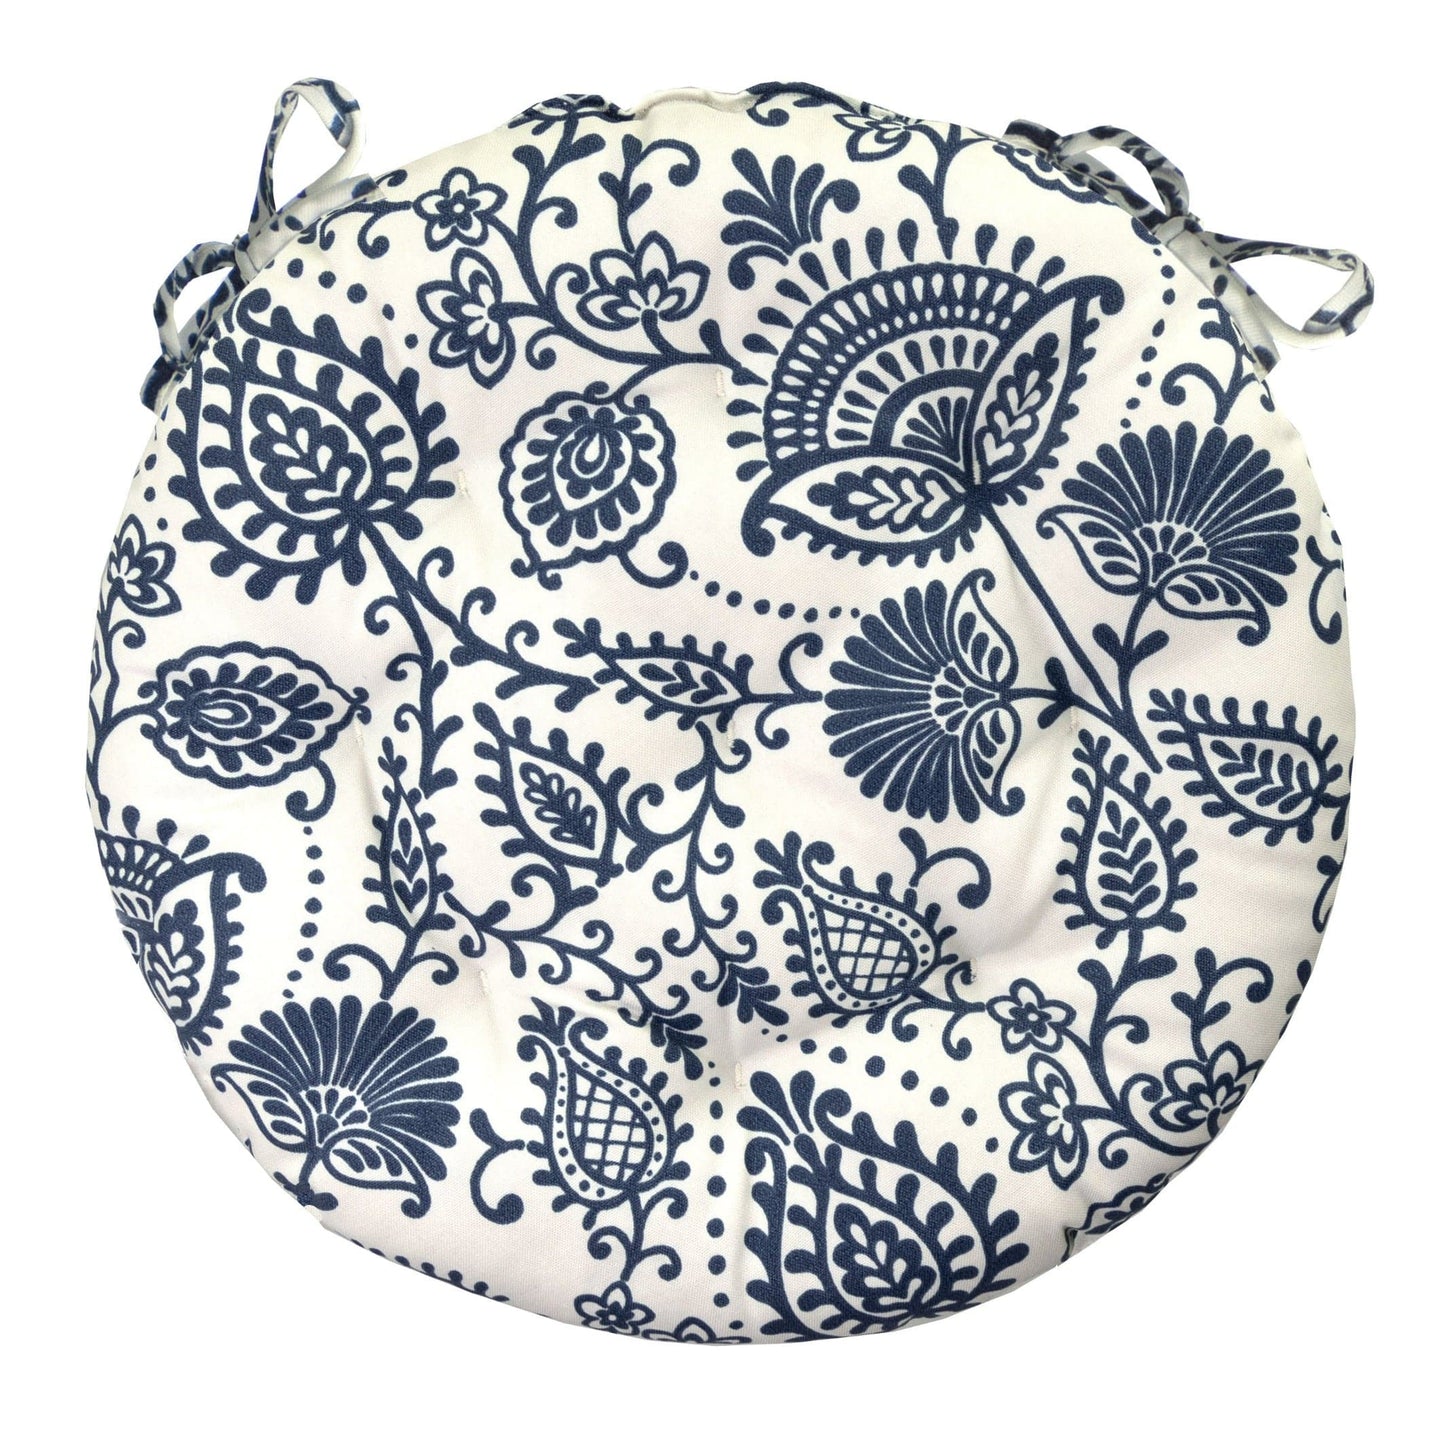 Sylvan Navy Blue Bistro Chair Pad - 16" Round Cushion with Ties -Barnett Home Decor - Indoor/Outdoor - Blue & White